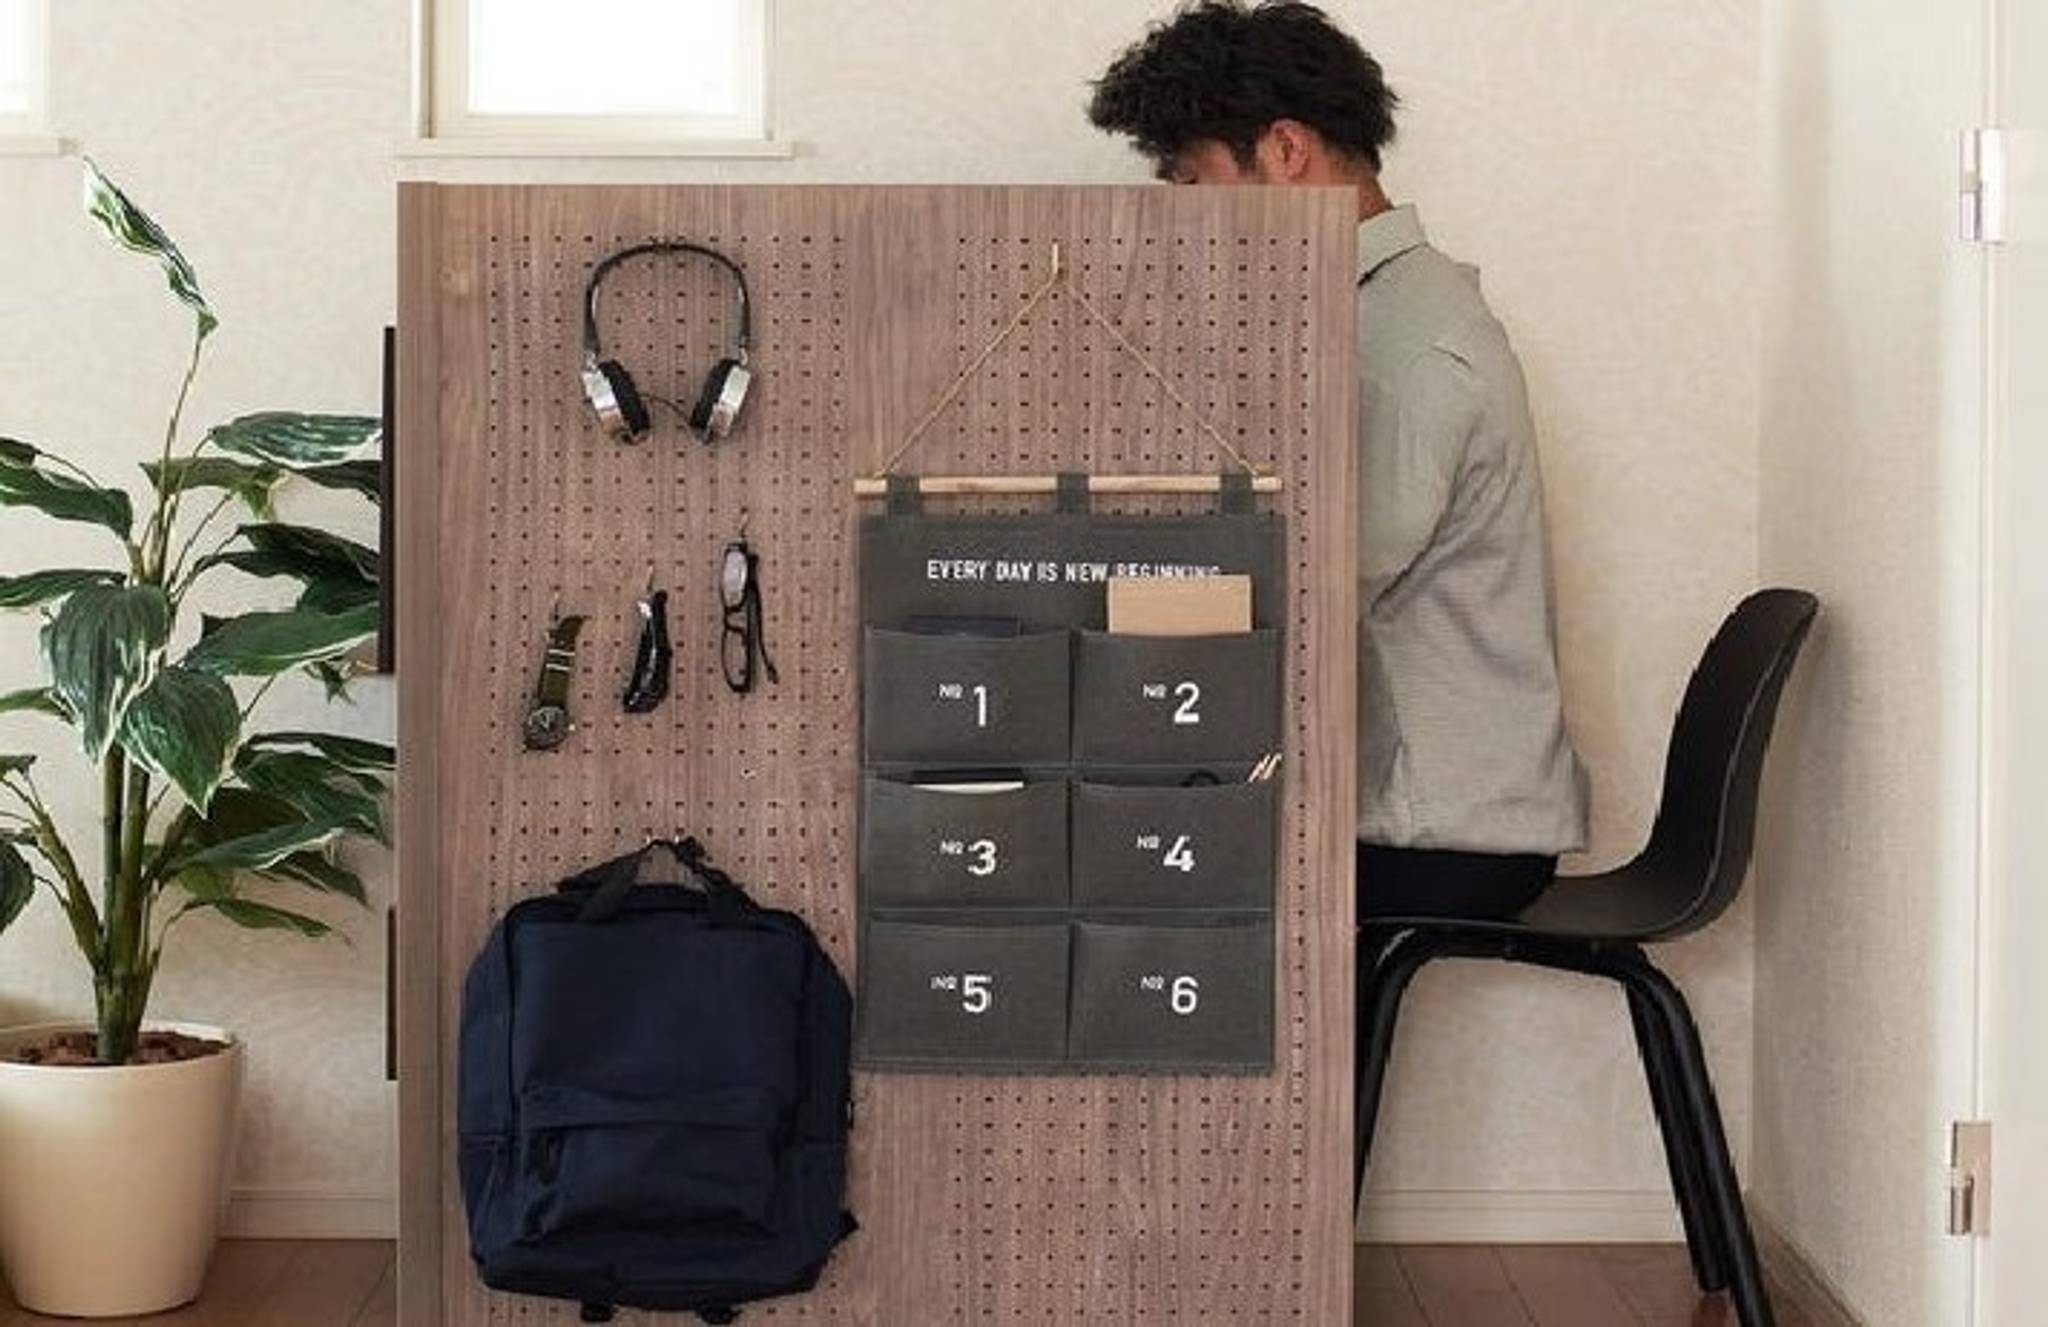 Mini-work cubicle brings office ambiance to the home